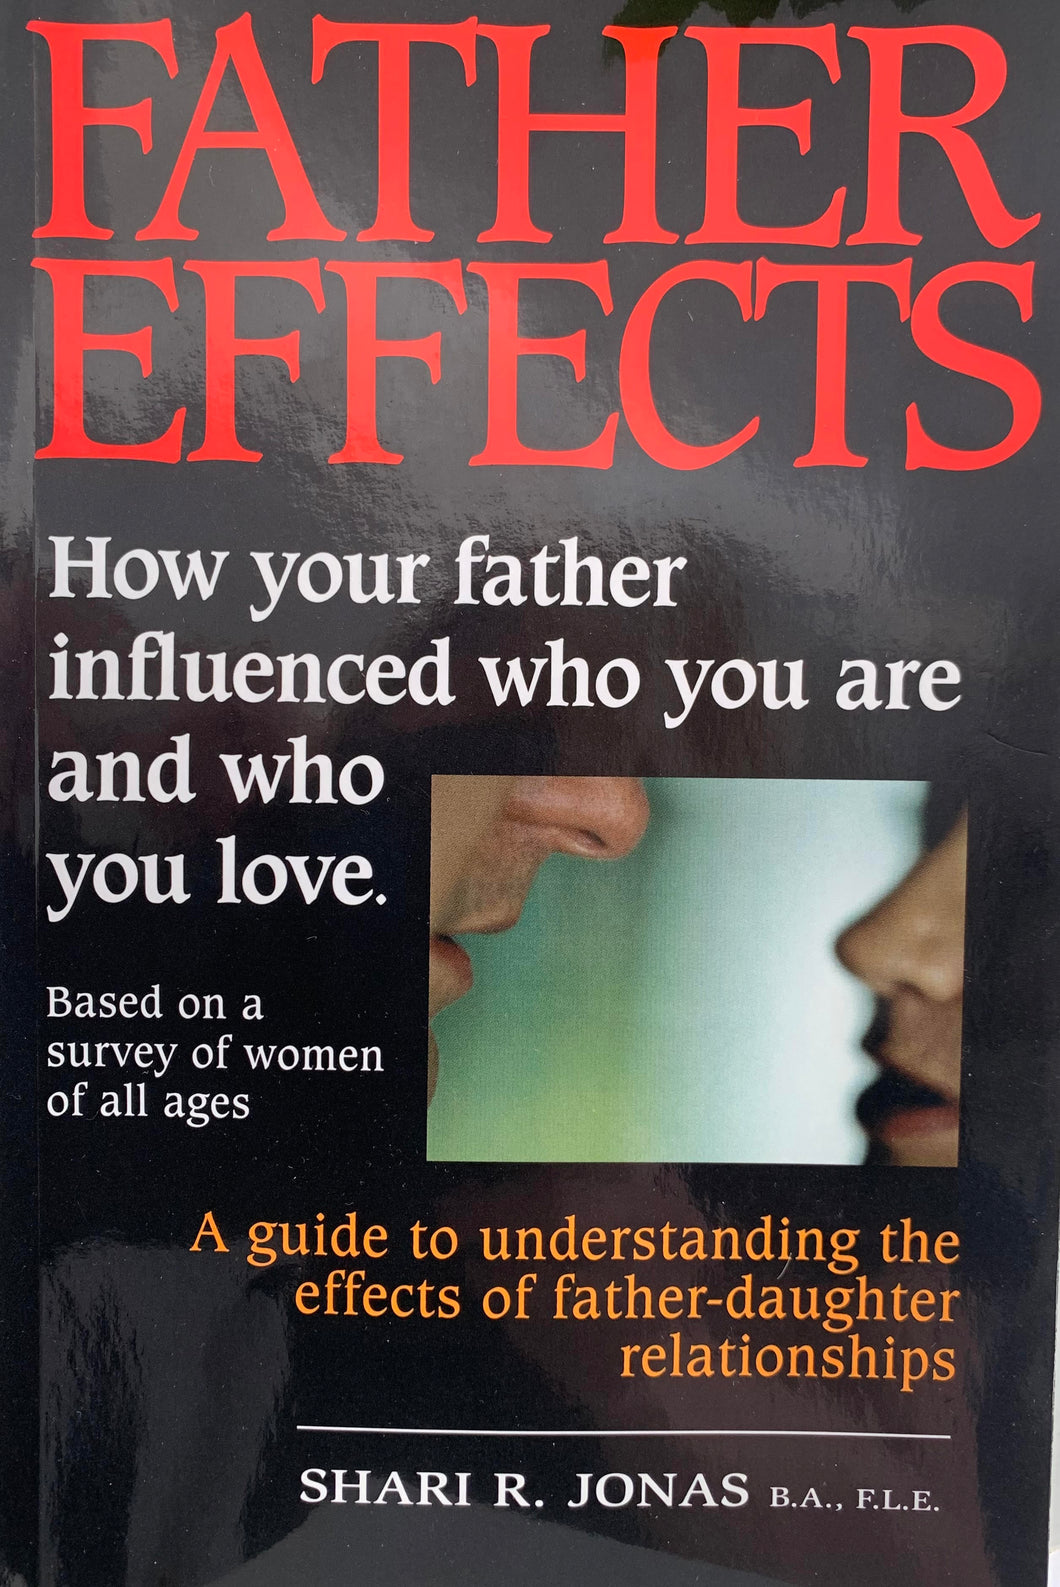 FatherEffects: How Your Father Influenced Who You Are and Who You Love - INSTANT DOWNLOAD